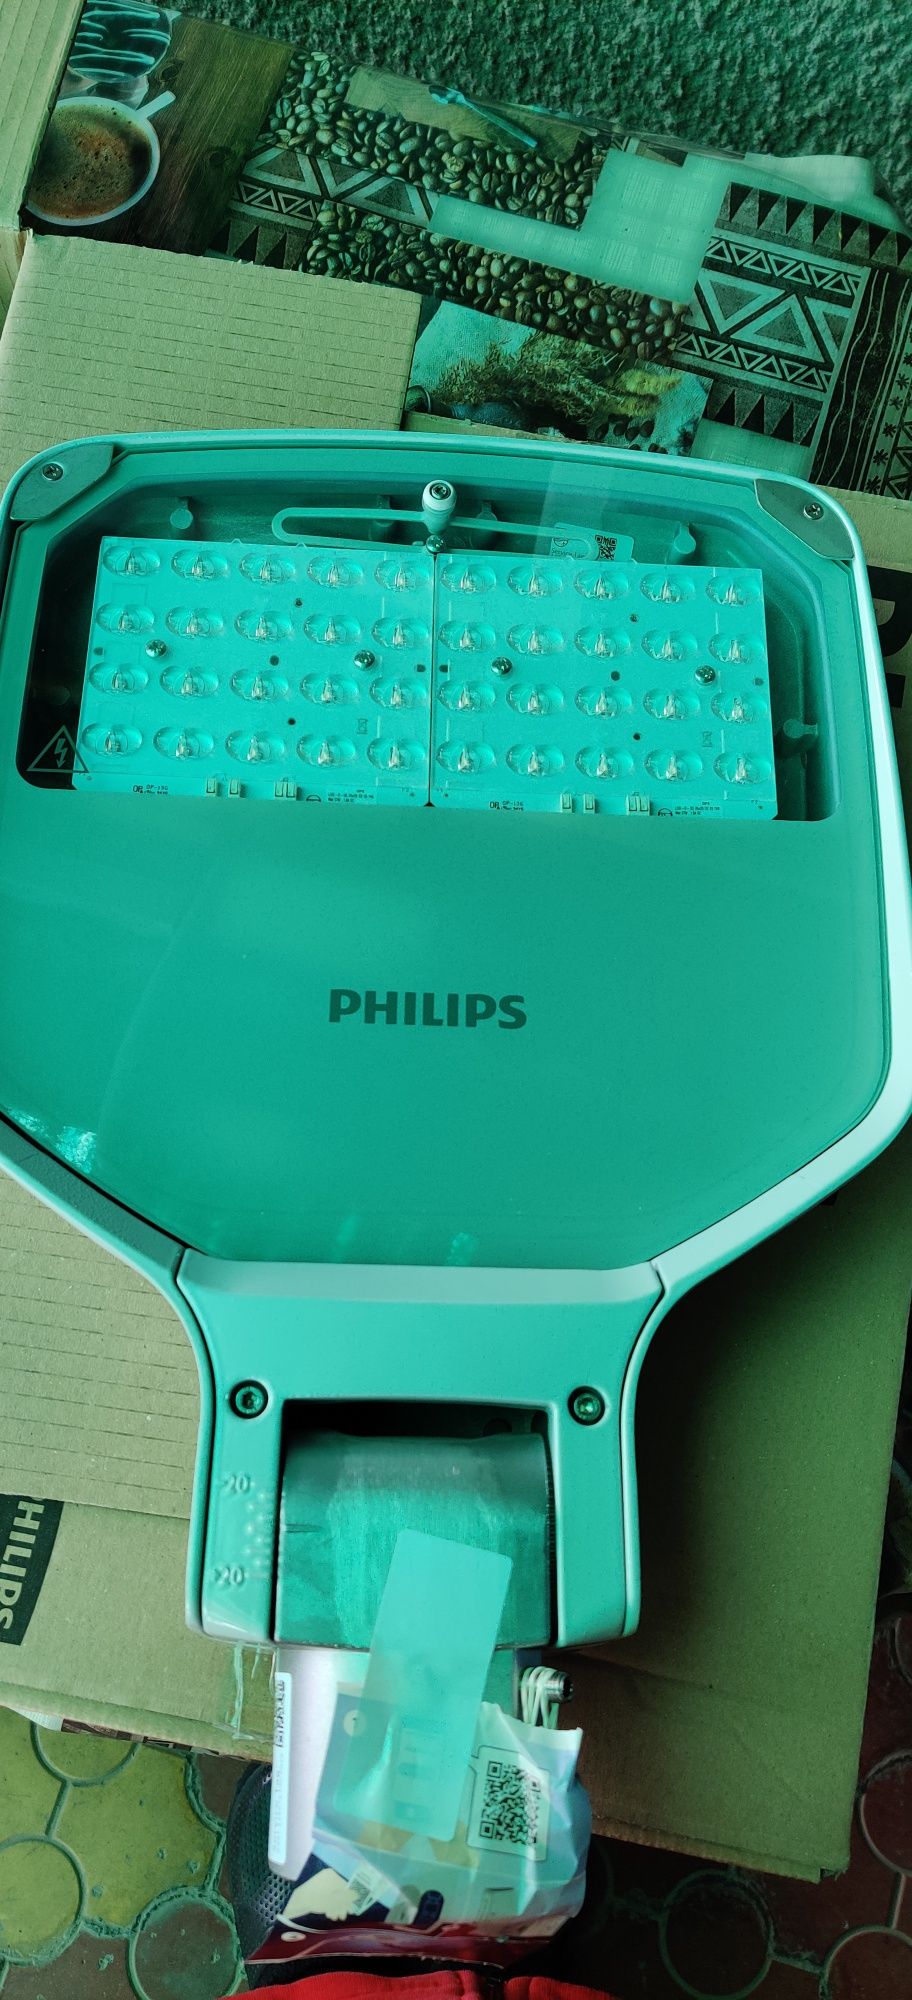 Lampa led Philips. Clear way gen 2.